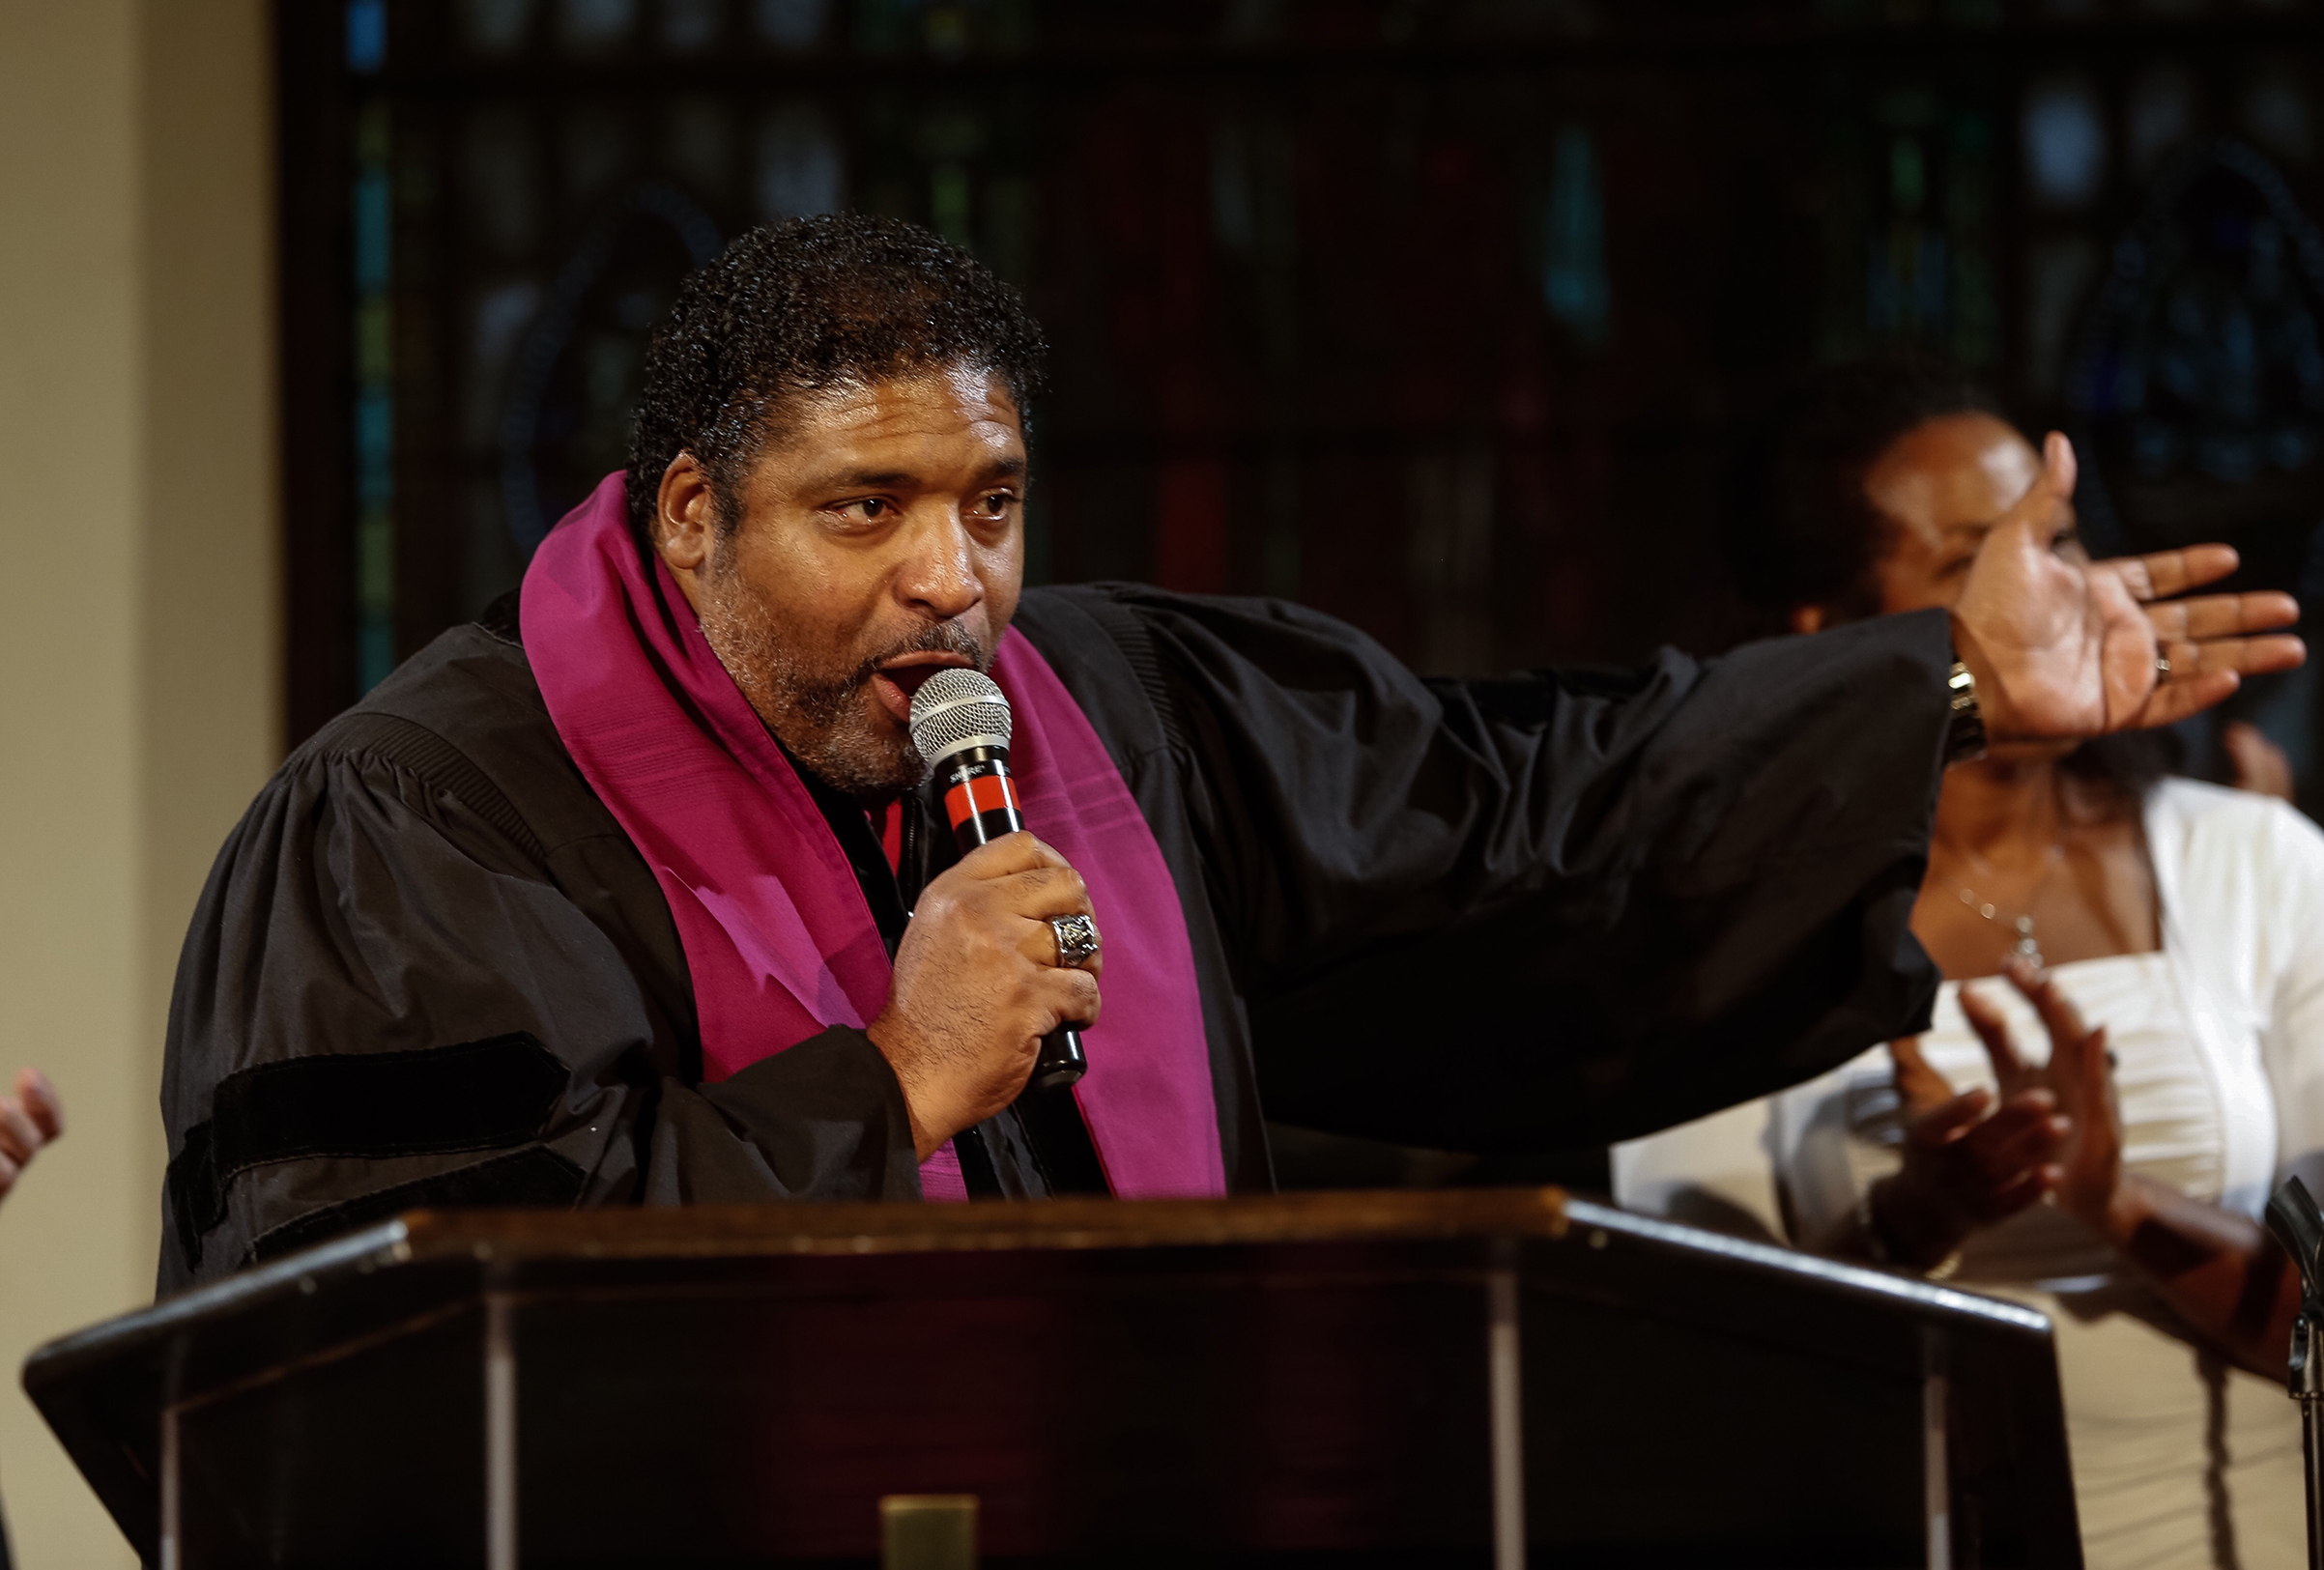 Reverend Dr. William J. Barber II speaks during a revival service to address moral public policies at Bethel AME Church in Boston on Aug. 1, 2016. (Keith Bedford—The Boston Globe/Getty Images)